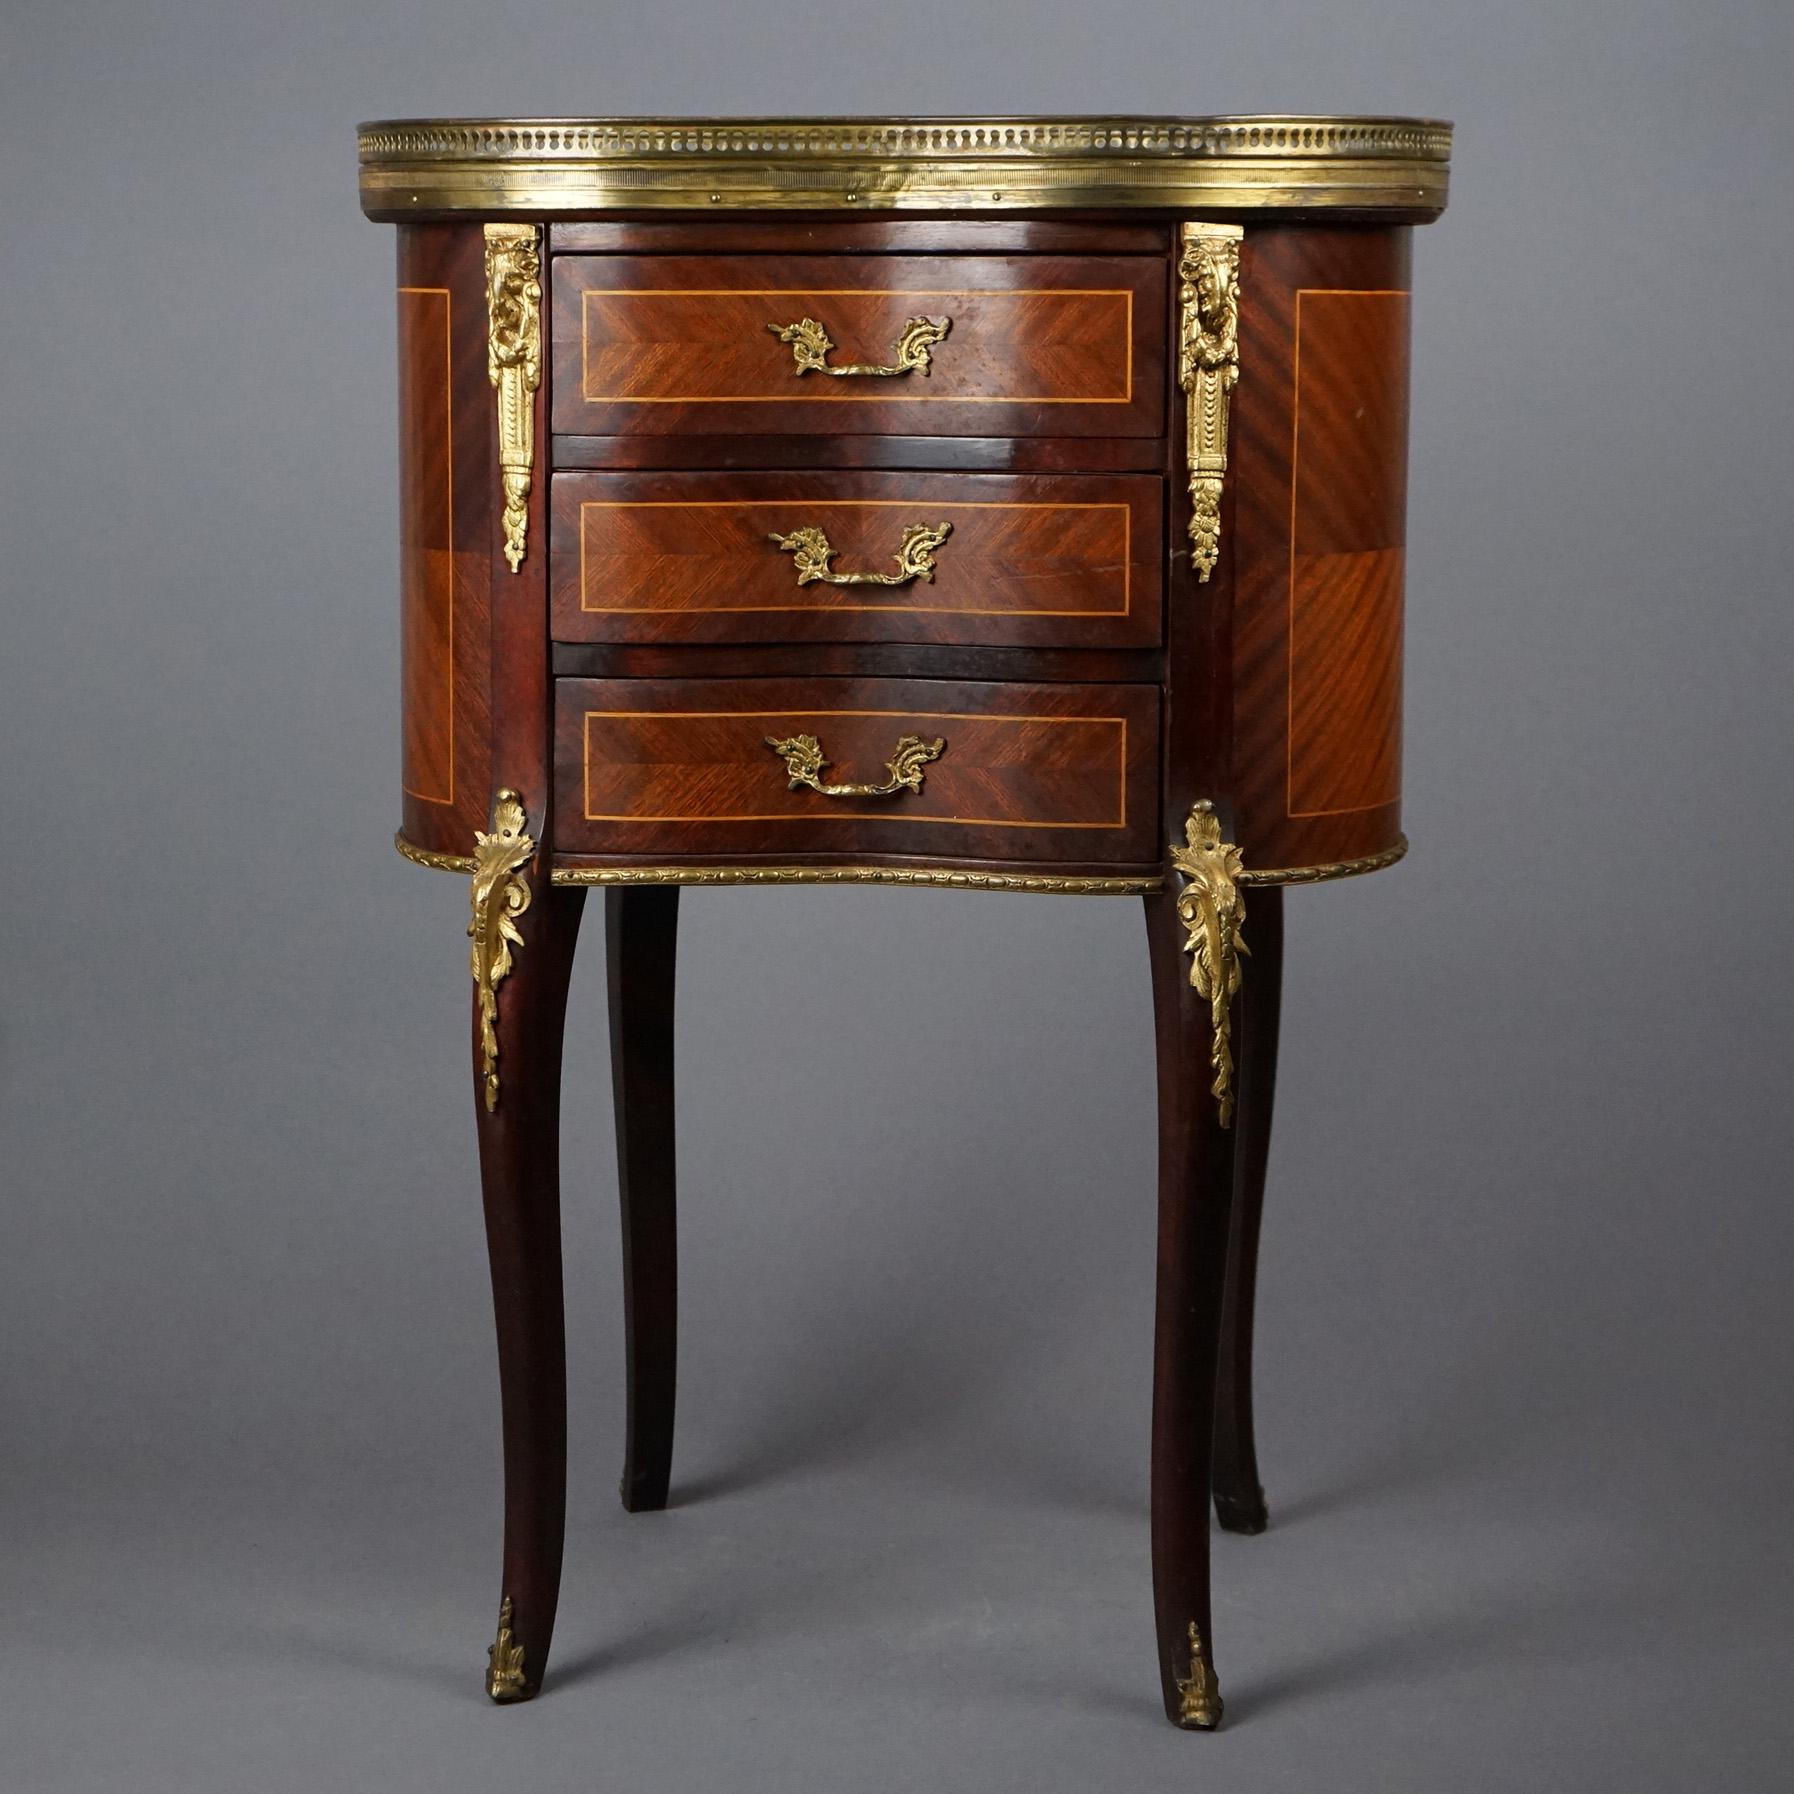 An antique Louis XVI style French side stand offers marble top with pierced gallery over mahogany case in kidney form and having three drawers with kingwood inlaid panels, raised on cabriole legs, cast ormolu mounts throughout, c1900

Measures -